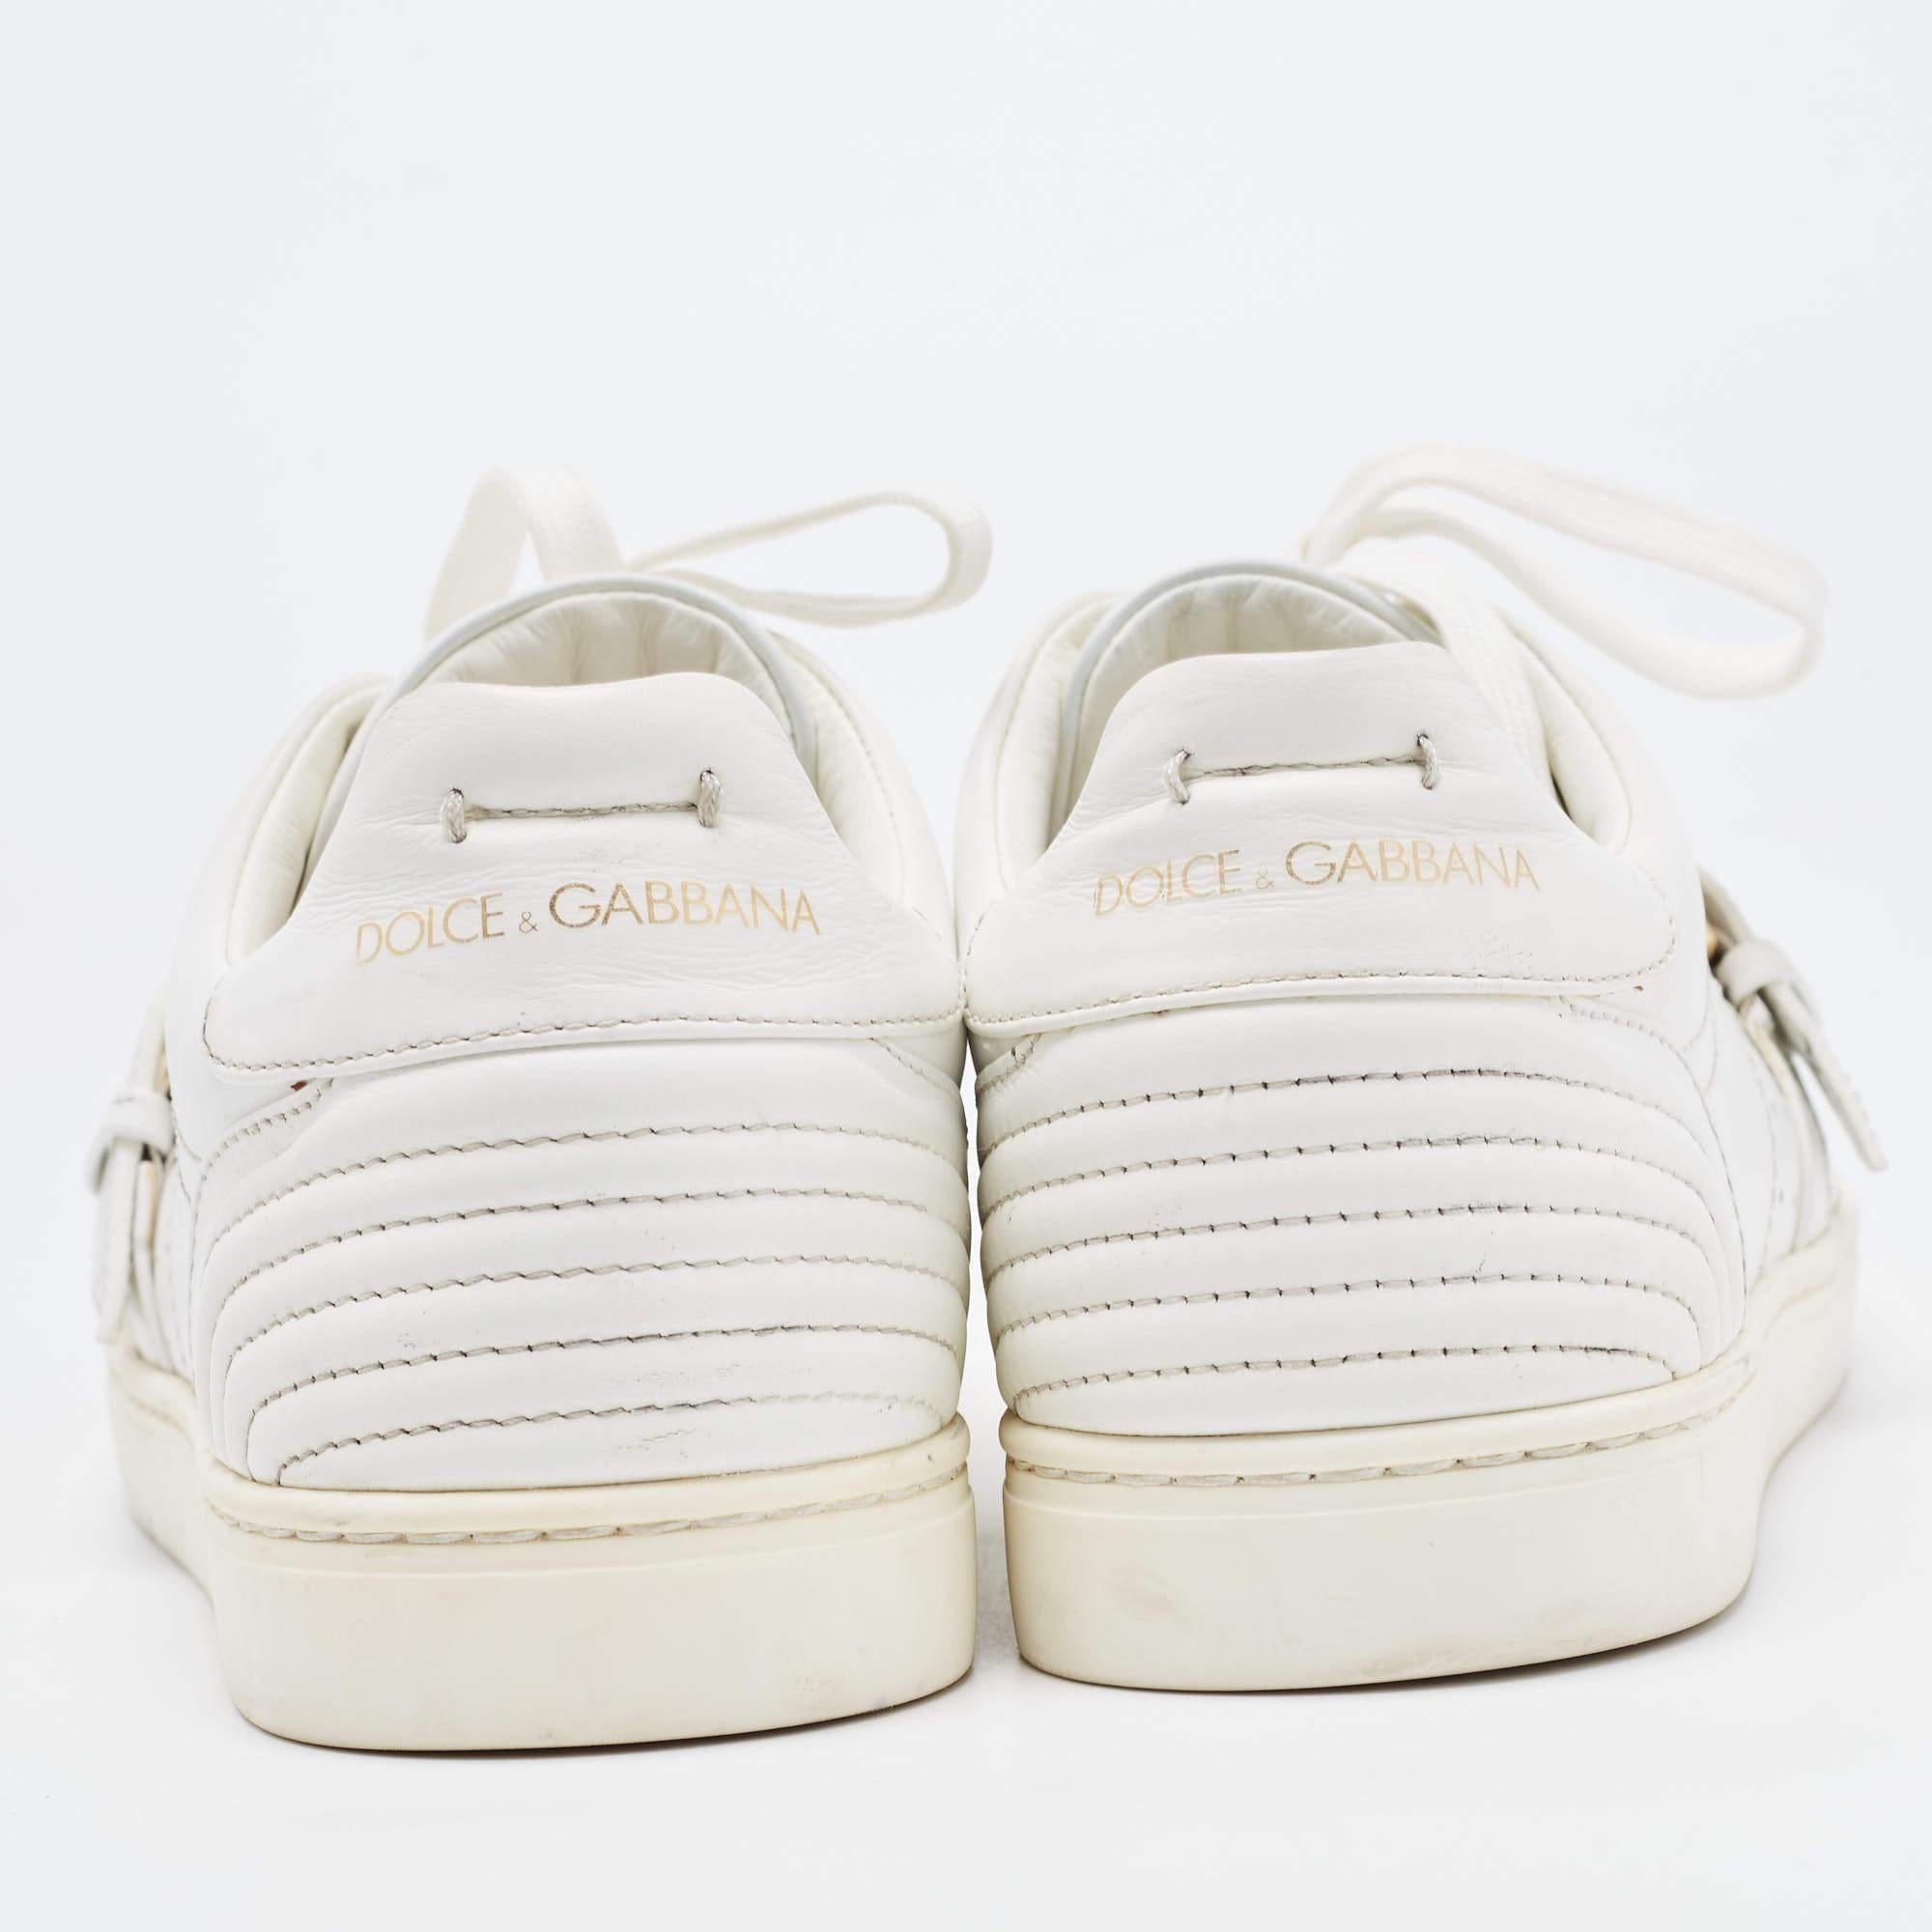 Dolce & Gabbana White Leather Lace Up And Buckle Low Top Sneakers Size 41 For Sale 2